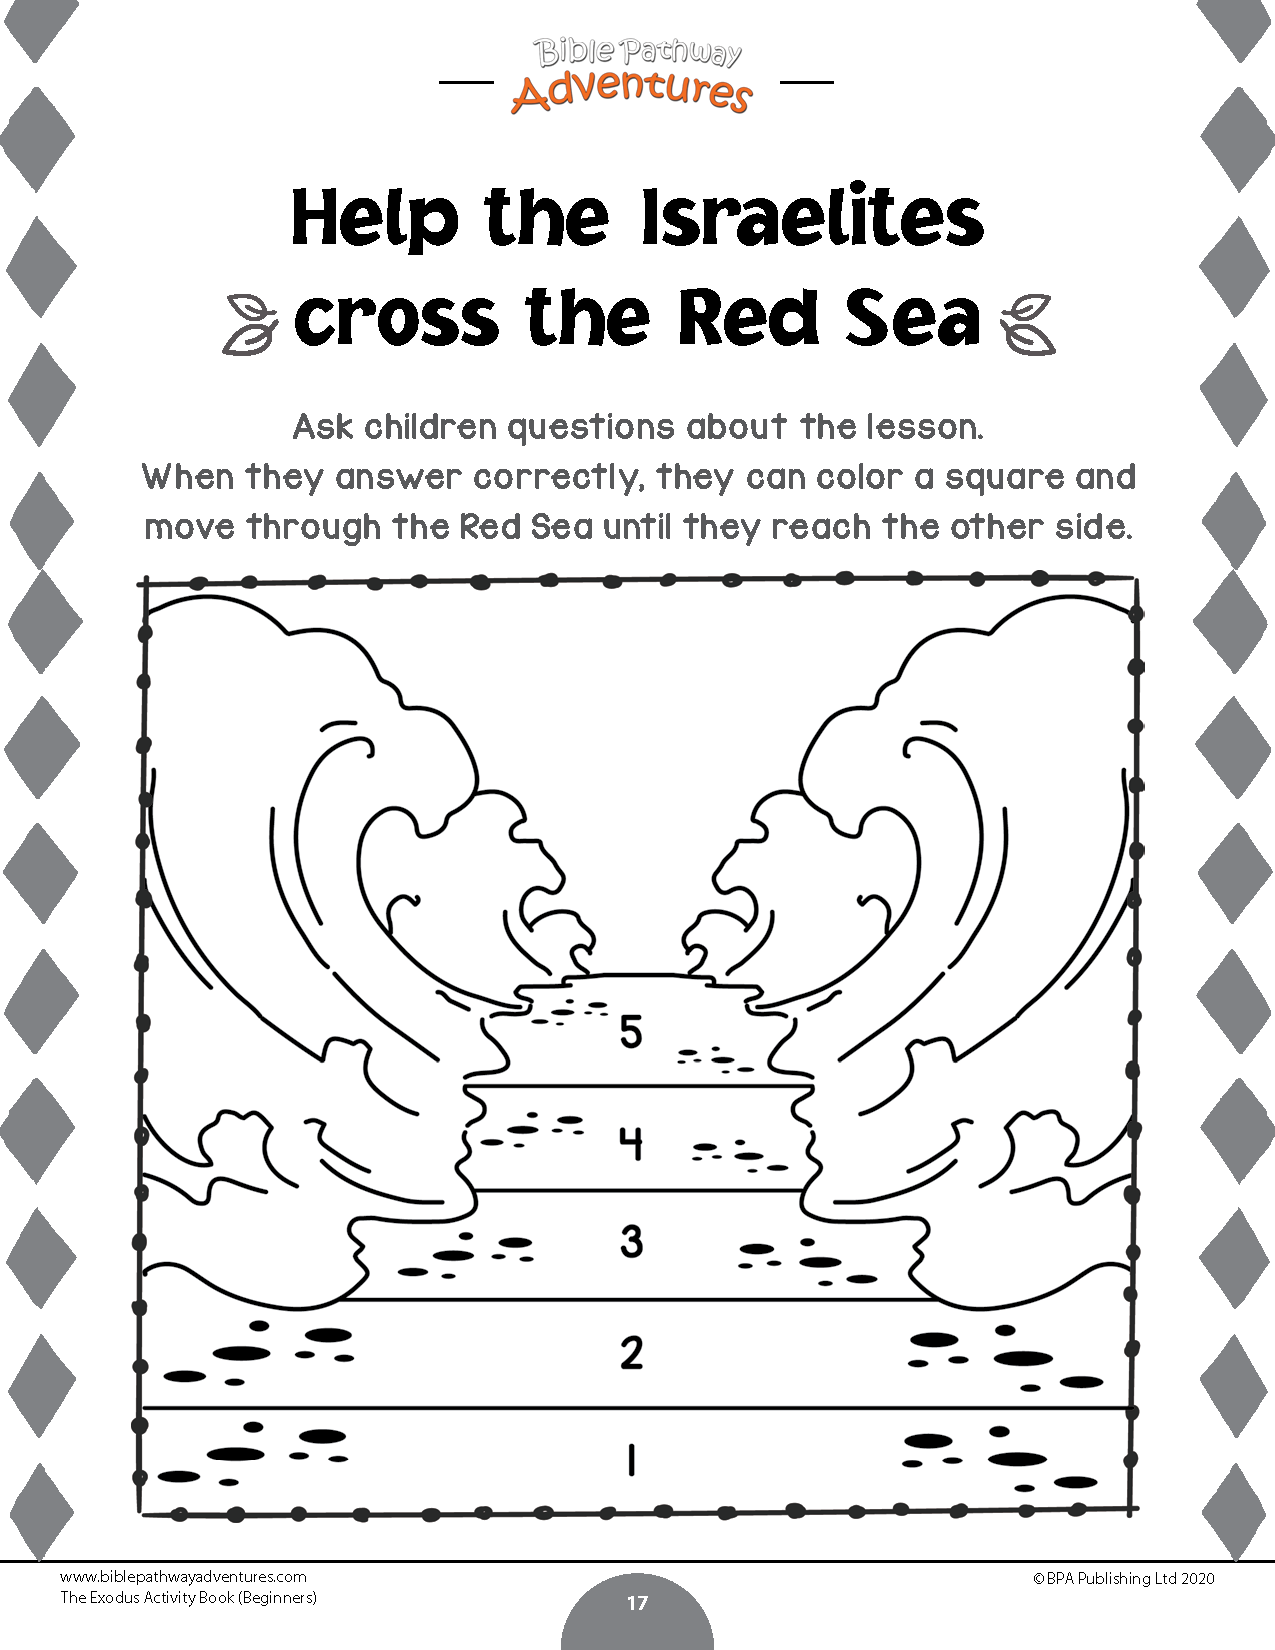 The Exodus Activity Book for Beginners (PDF)